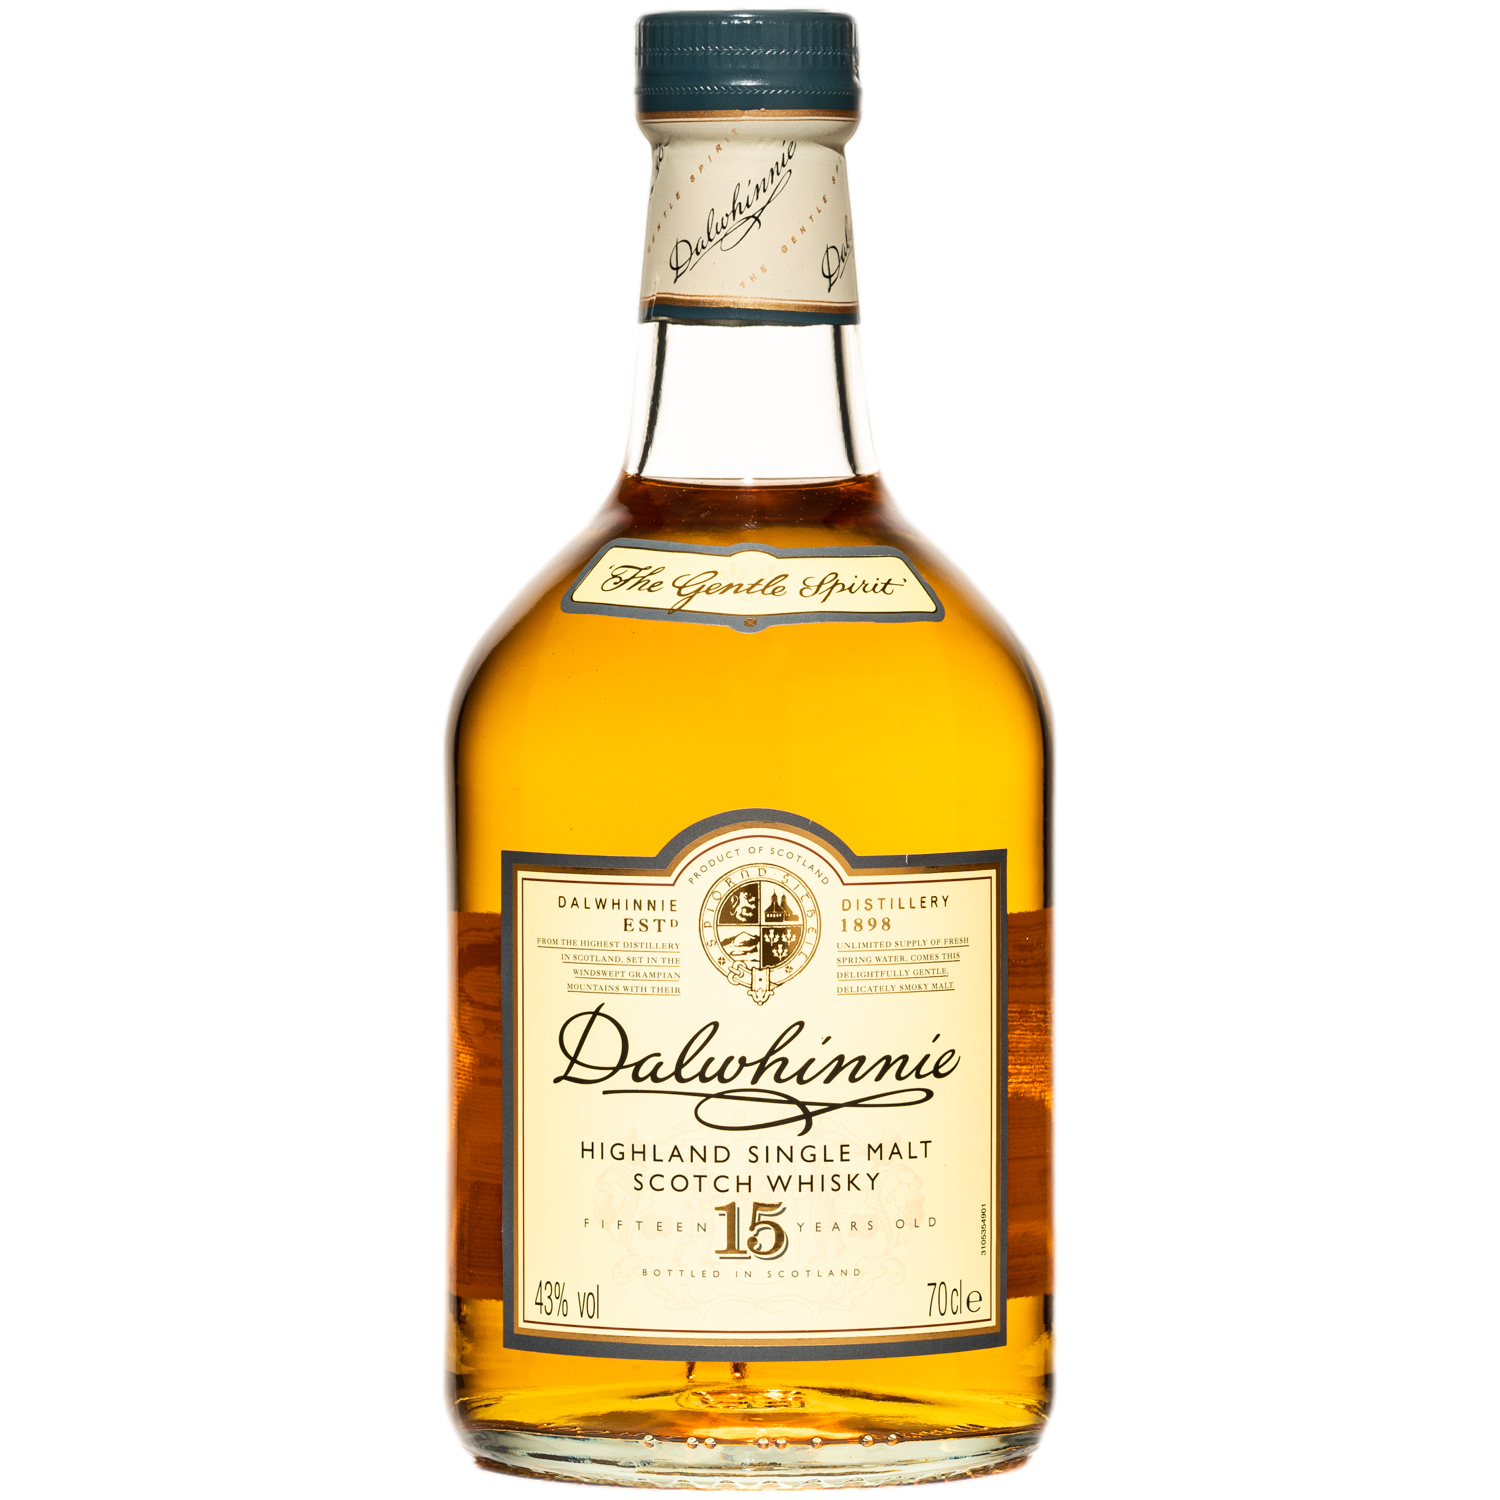 Brothers - Old Whisky- Whisky Barrel 15 Dalwhinnie Jahre Highland